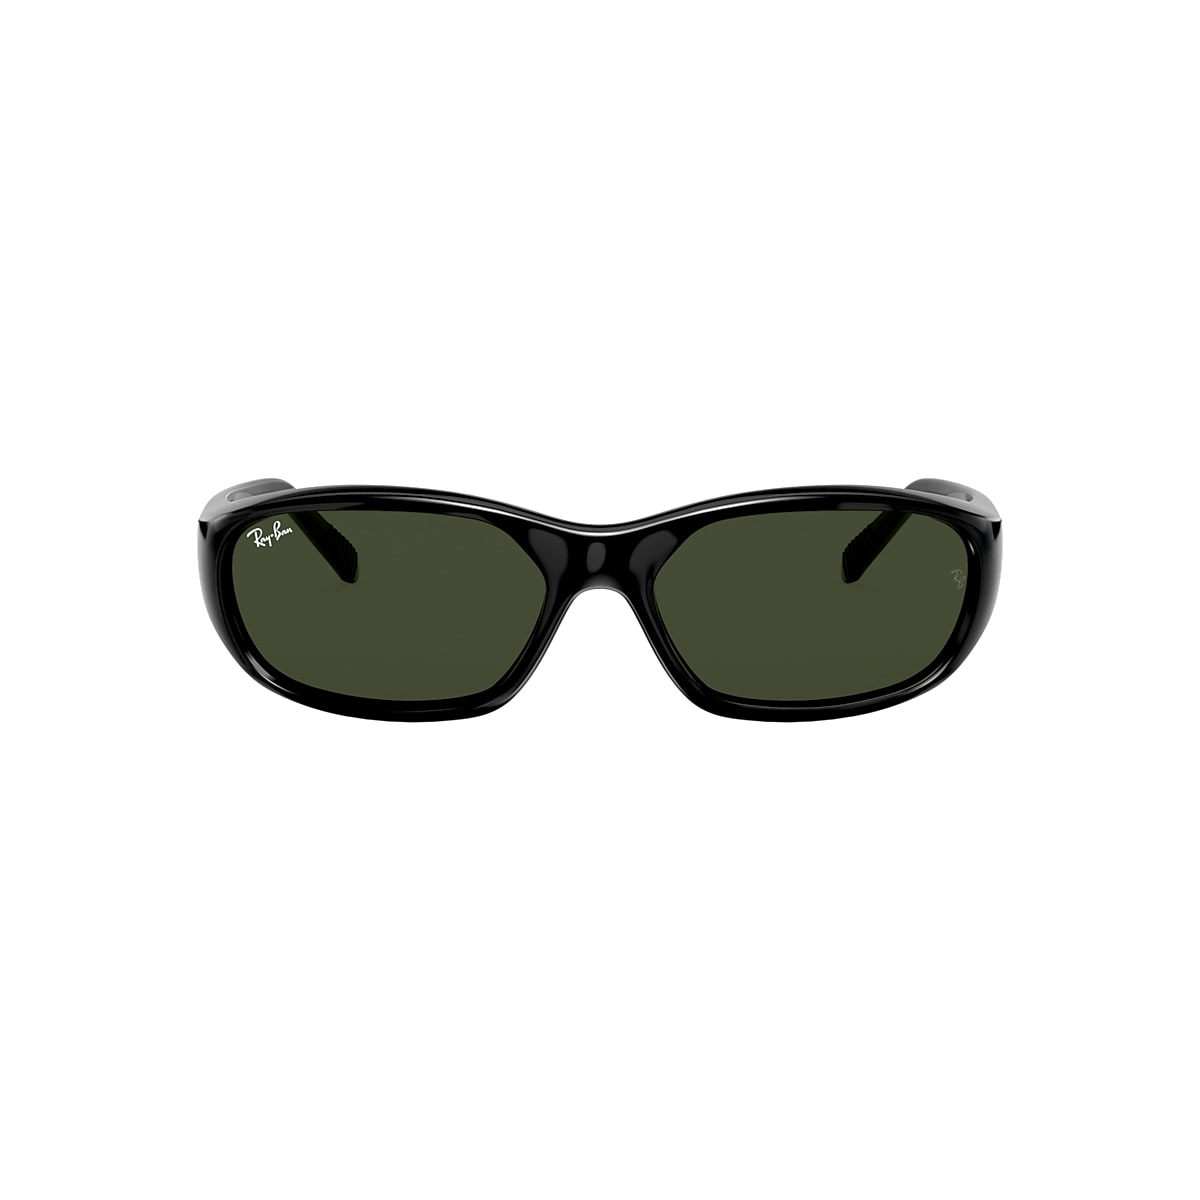 https://assets.sunglasshut.com/is/image/LuxotticaRetail/8056597139908_shad_fr.png?impolicy=SEO_1x1